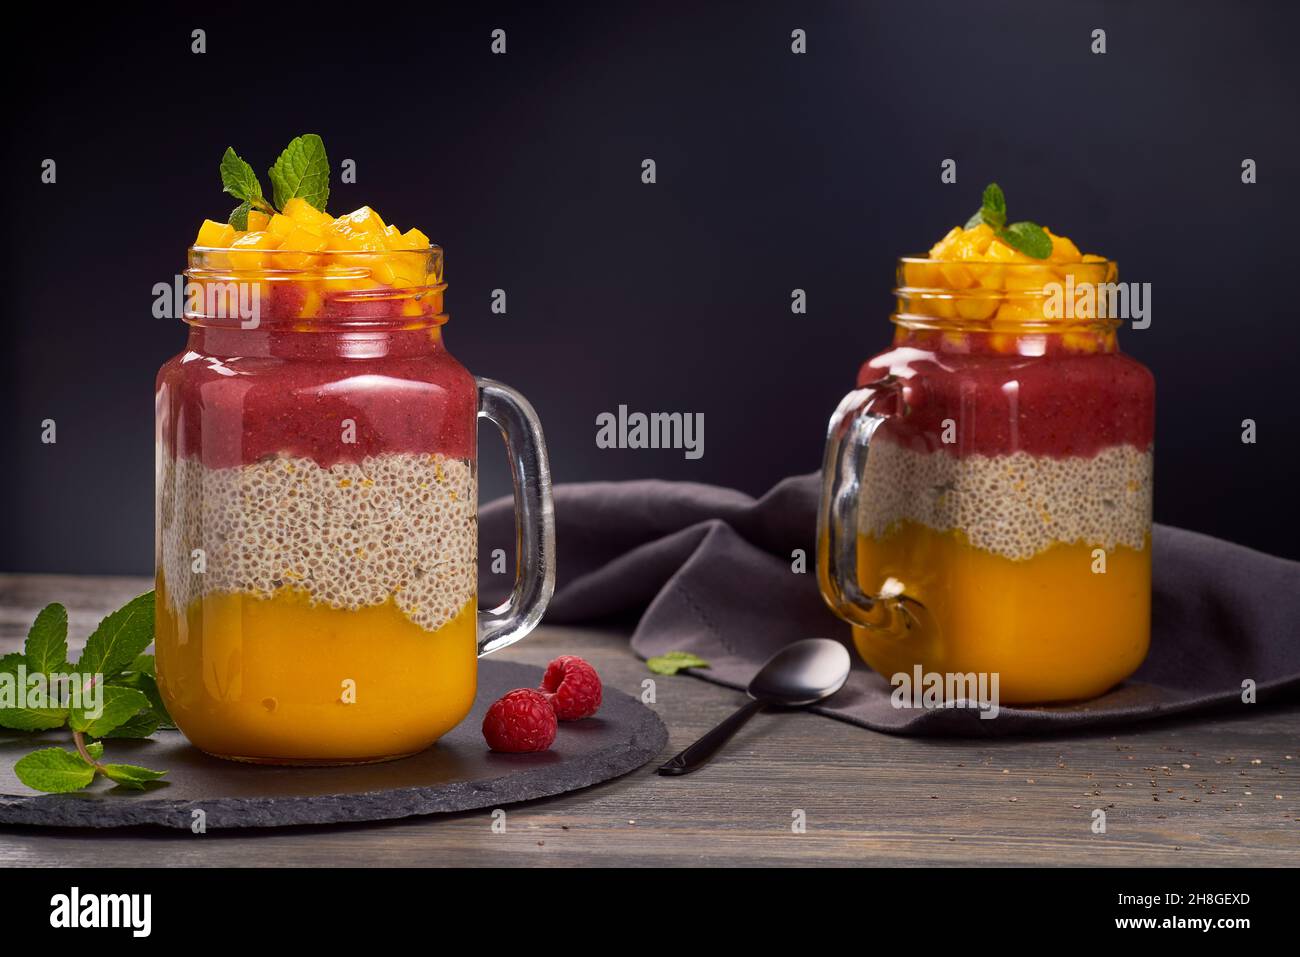 Two jars of layered chia pudding on dark wooden background Stock Photo